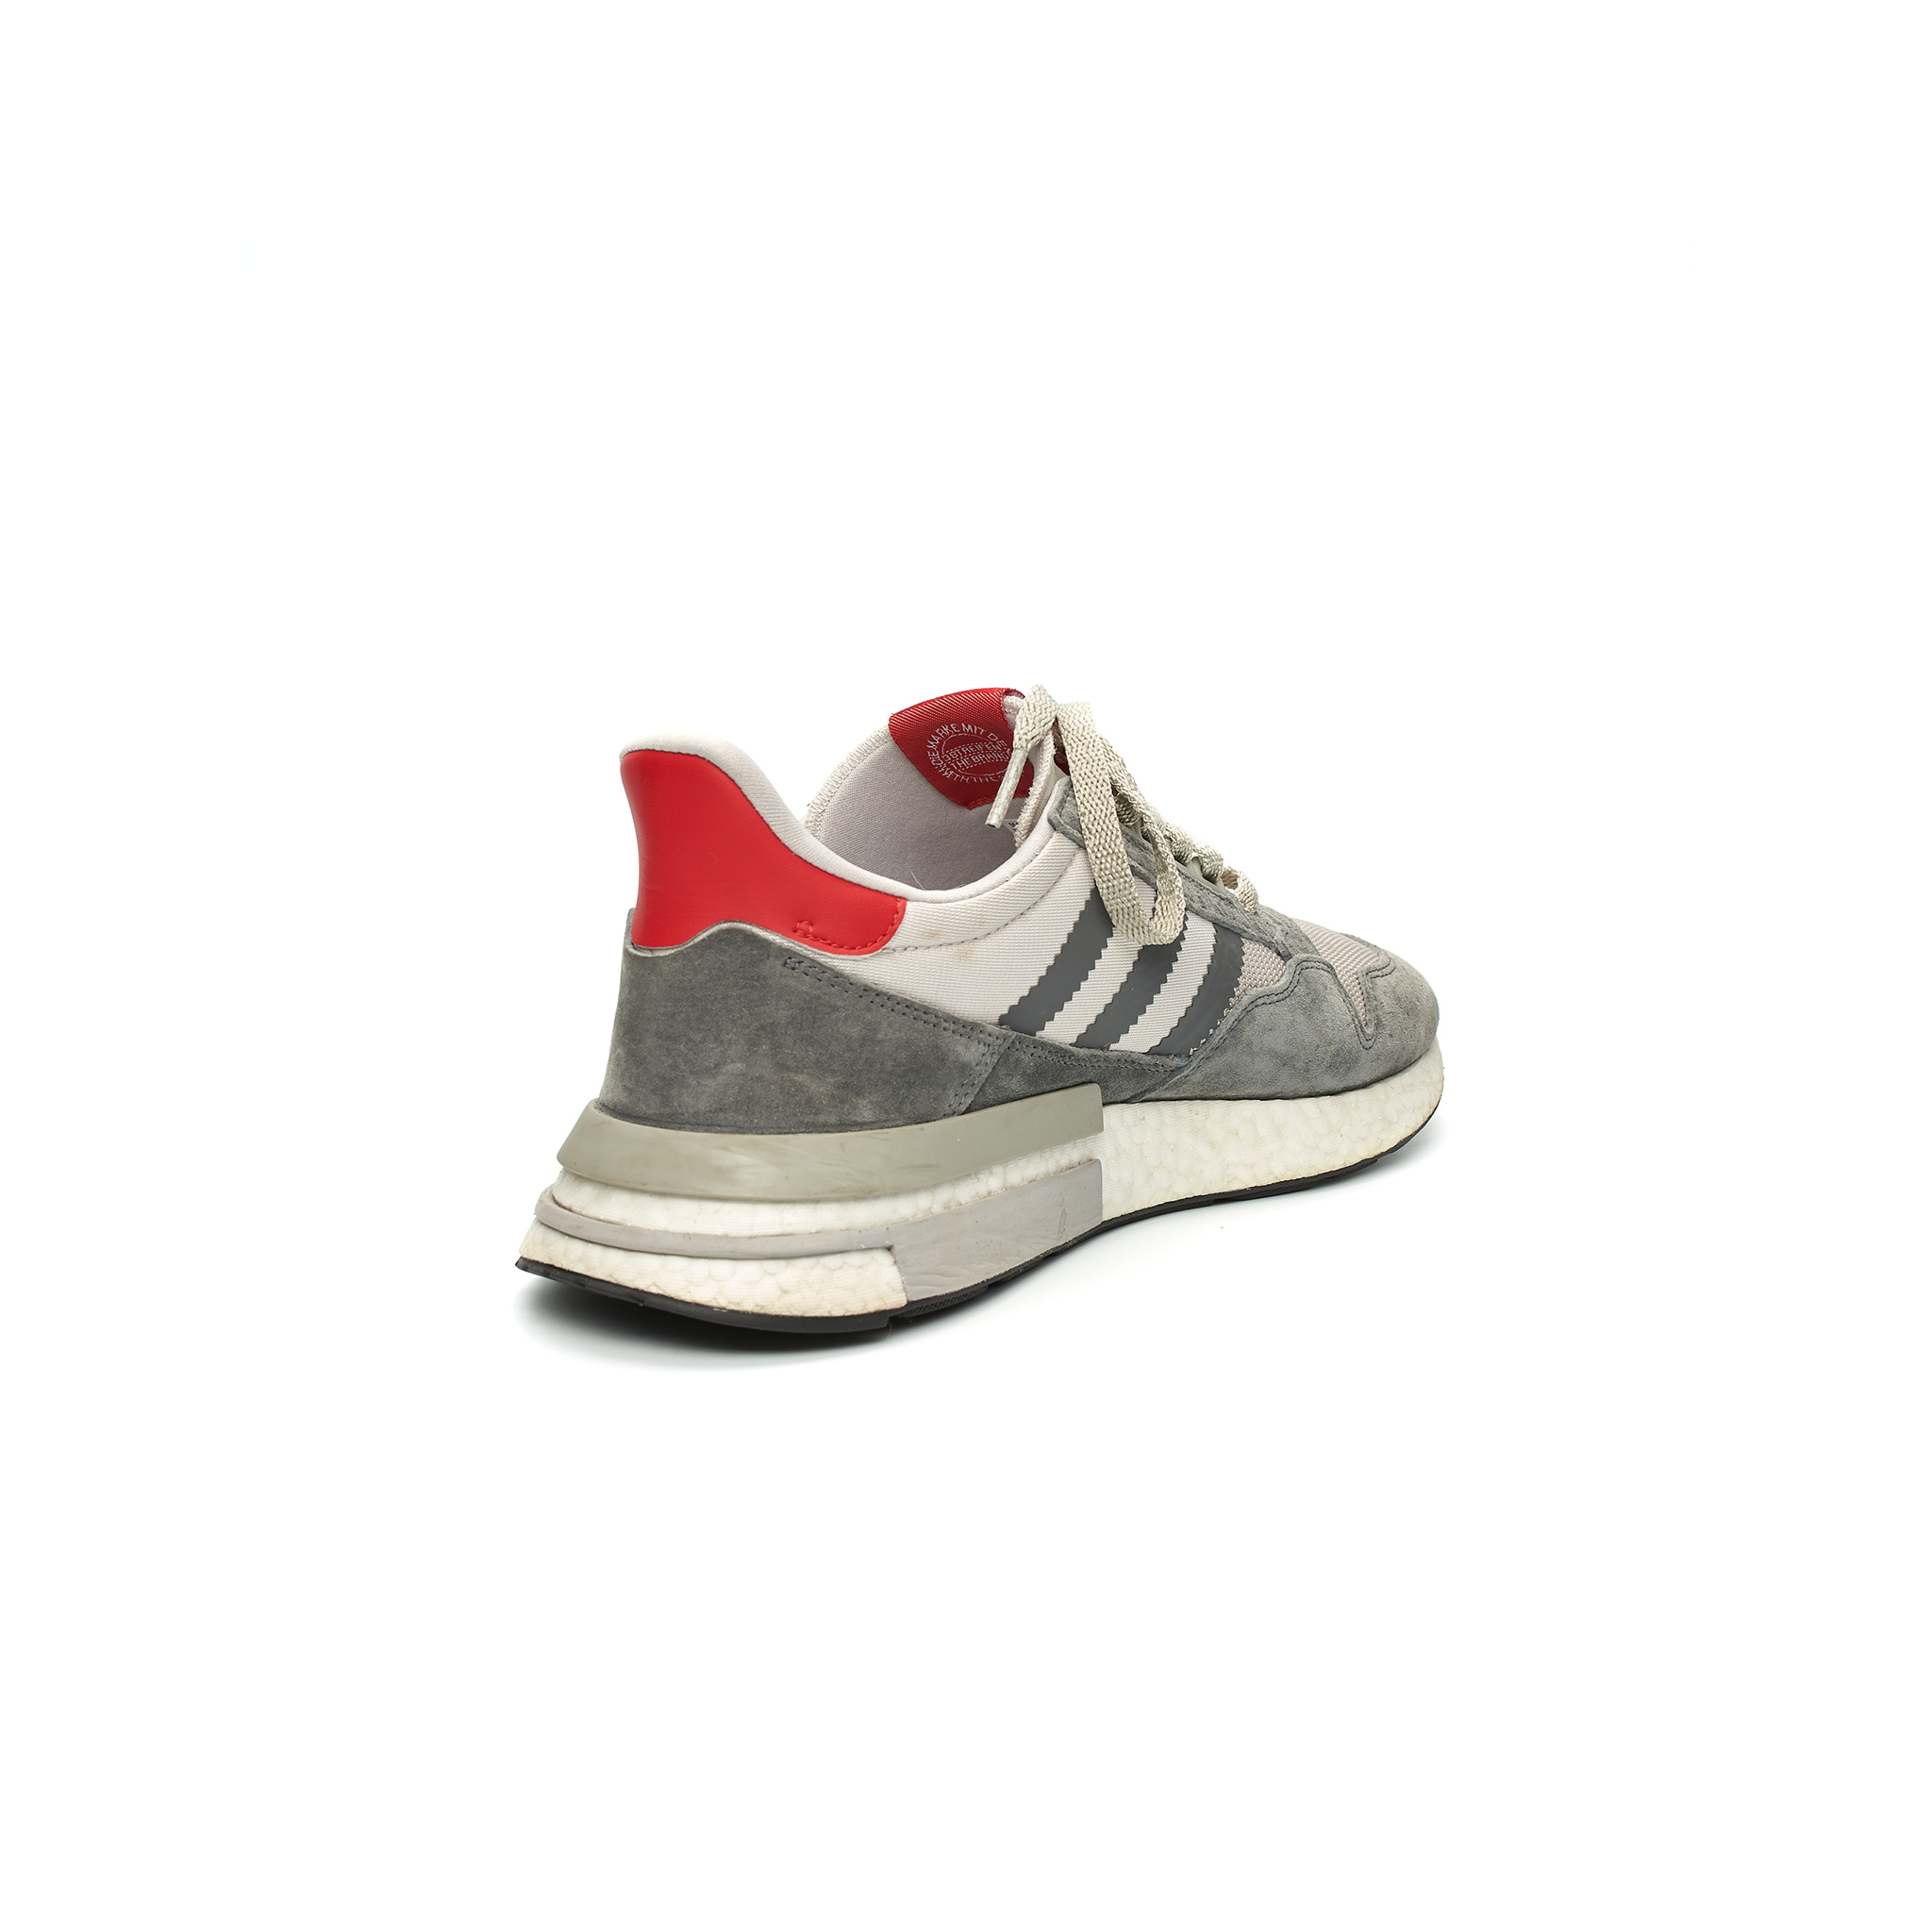 adidas ZX 500 RM Grey Scarlet – Story Cape Town